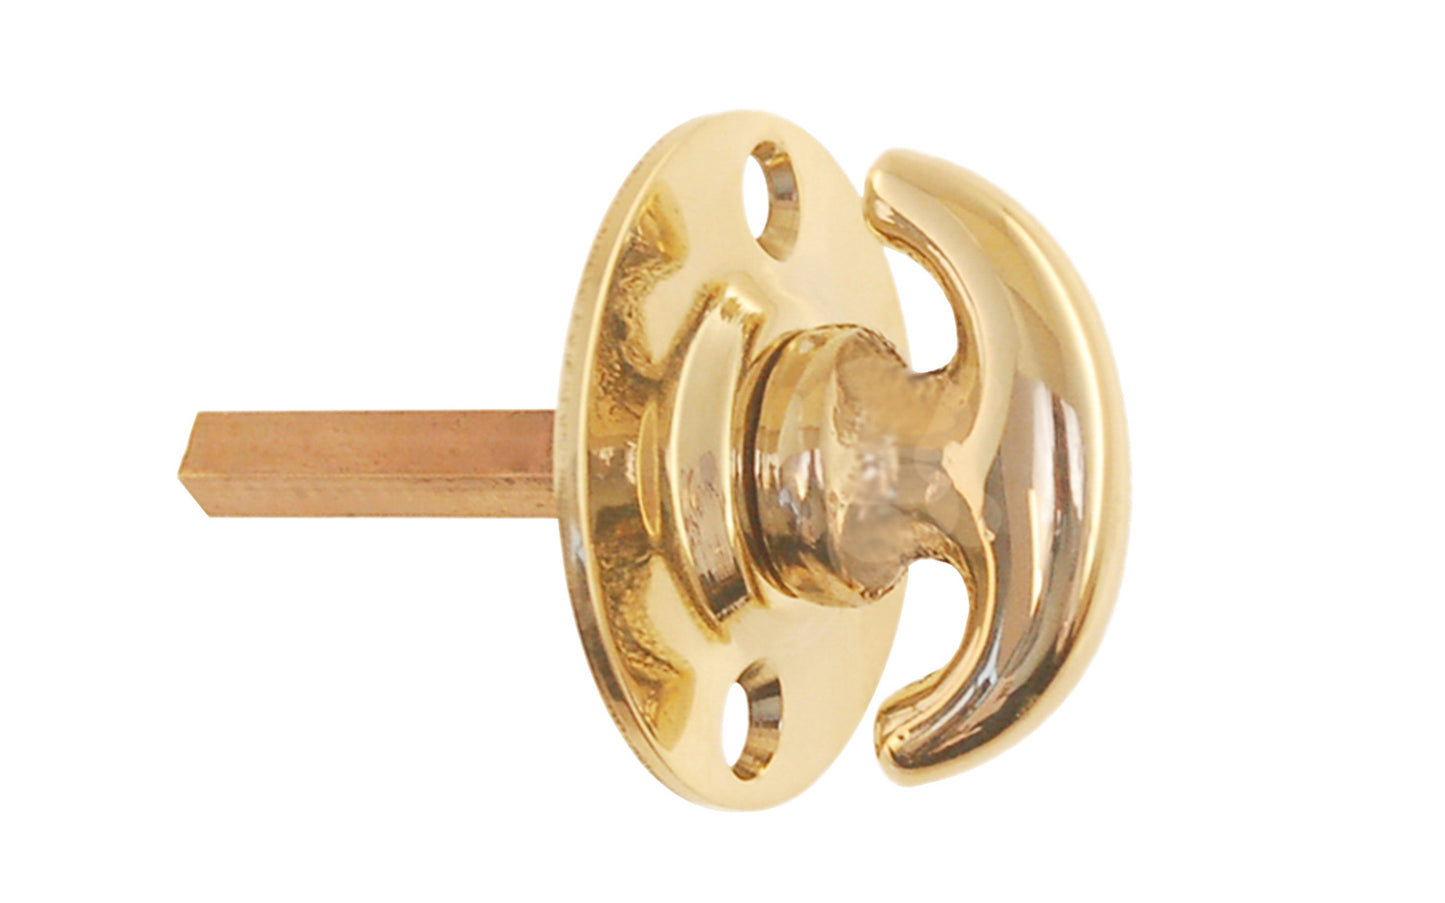 An old-style Classic Solid Brass crescent thumbturn with round plate for locking doors. Used with mortise locks, deadbolts, night-locks, catches. Made of solid brass material. 3/16" thick shaft. Unlacquered brass (will patina naturally)